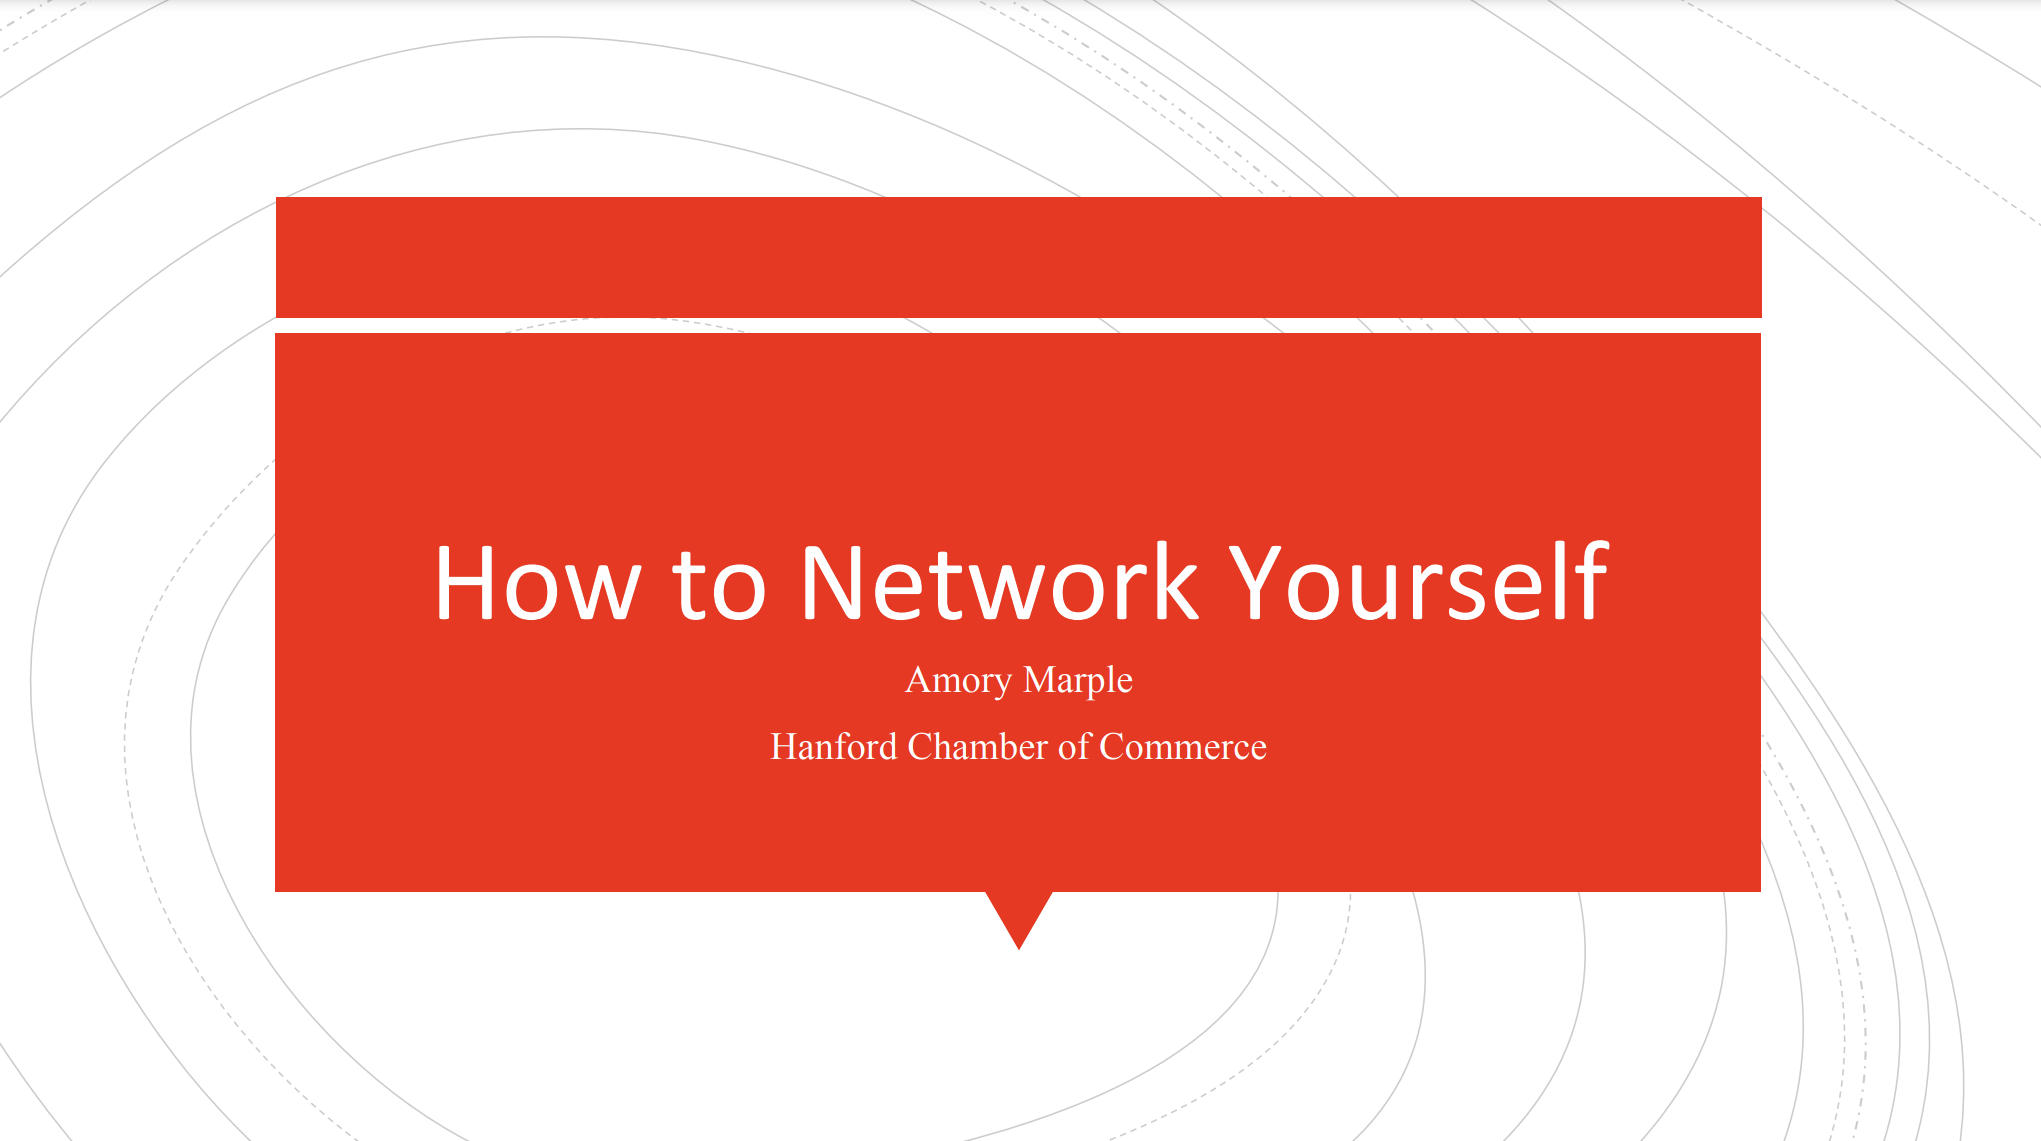 How to Network Yourself